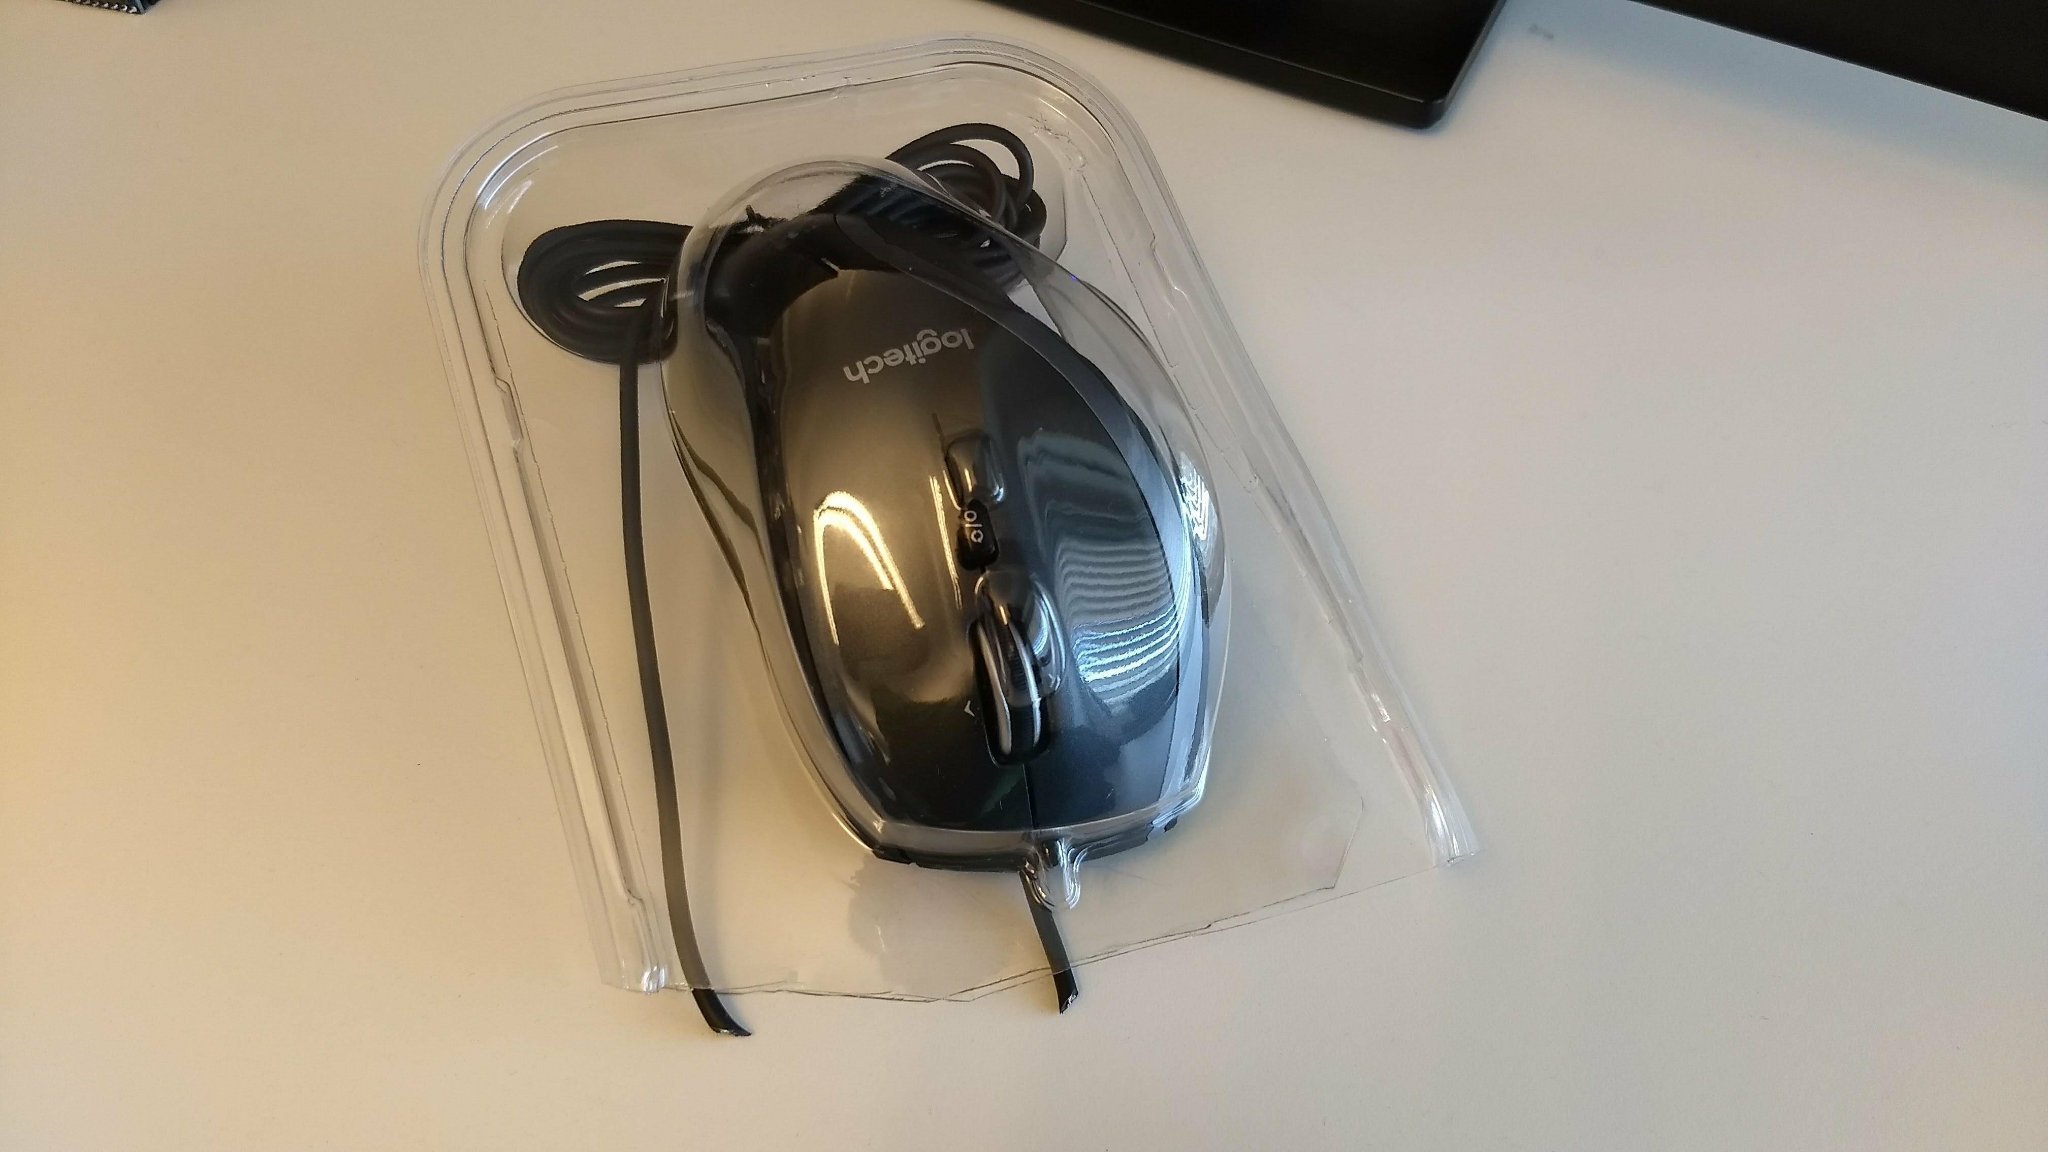 I was hyped to use my new mouse at work - meme